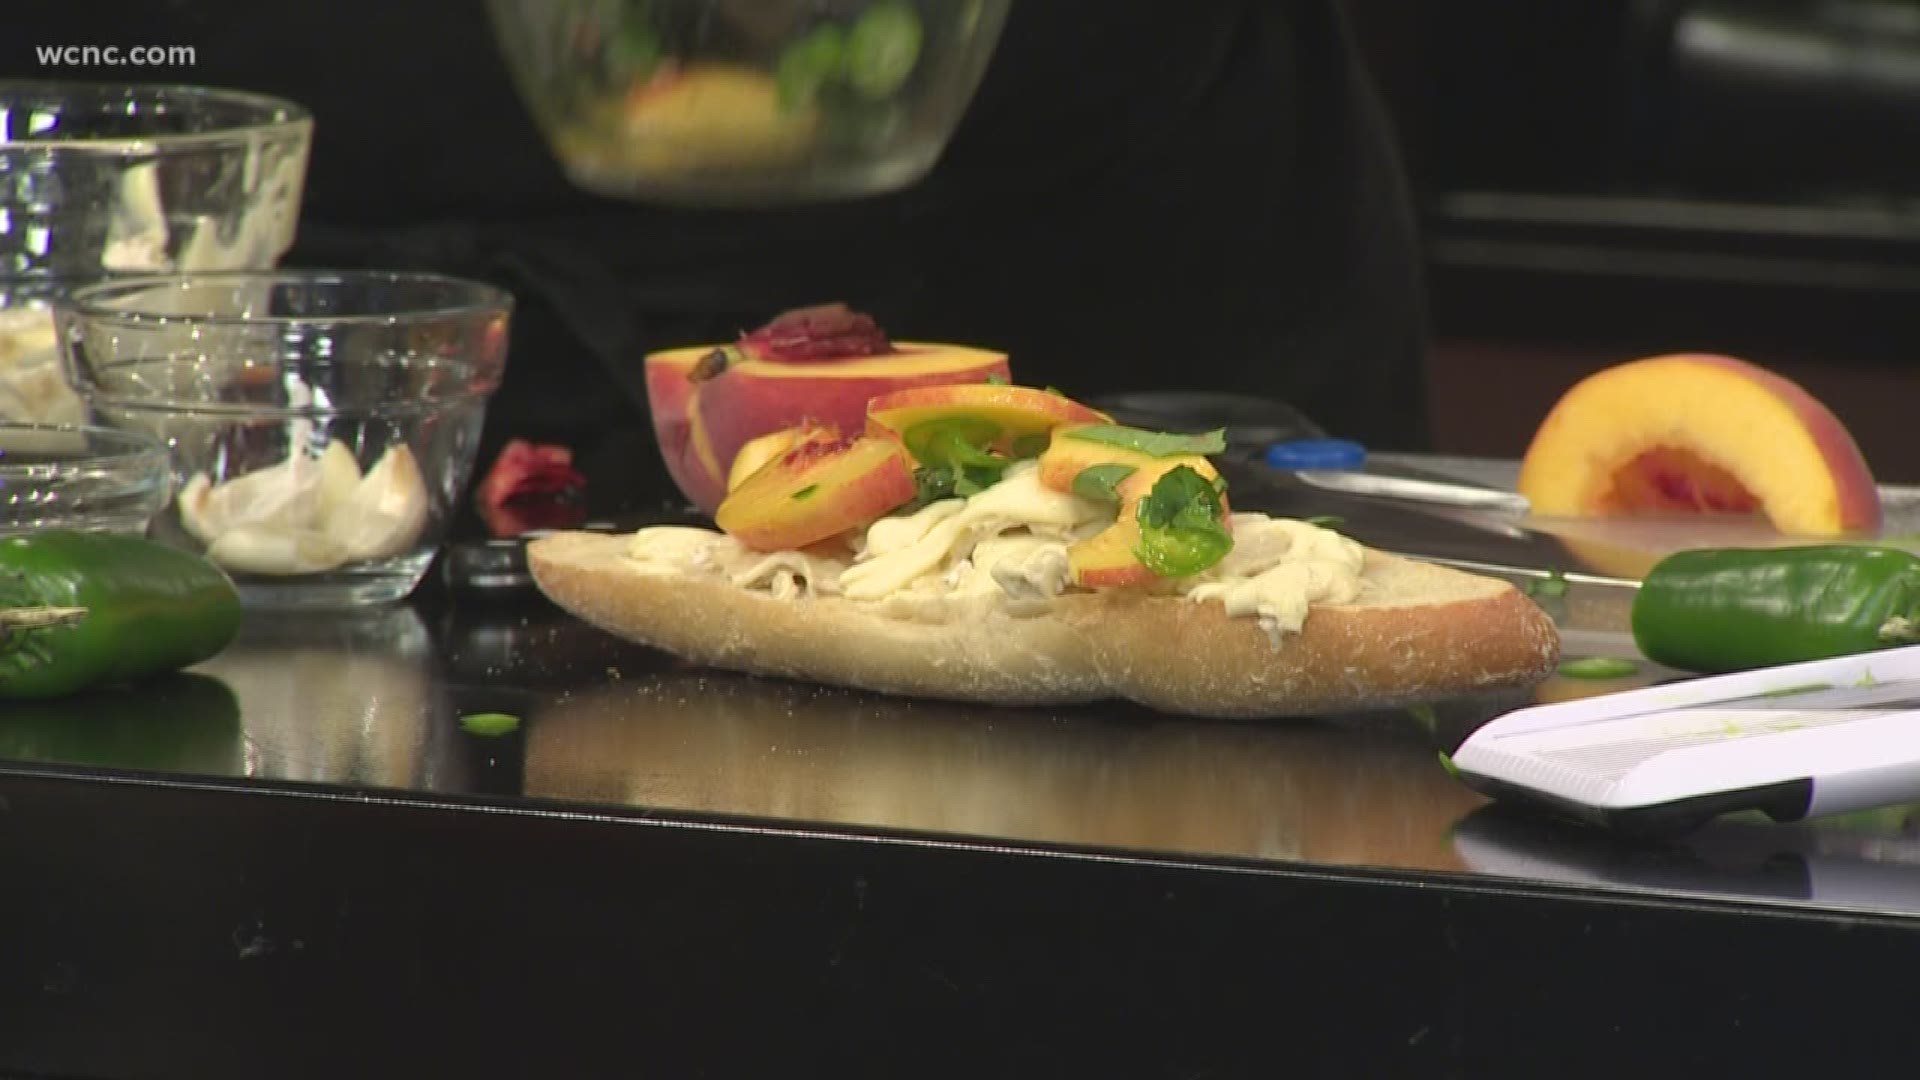 Chef Jill Aker Ray shows us how to prepare Carolina moon cheese toast with peaches and jalapeno.